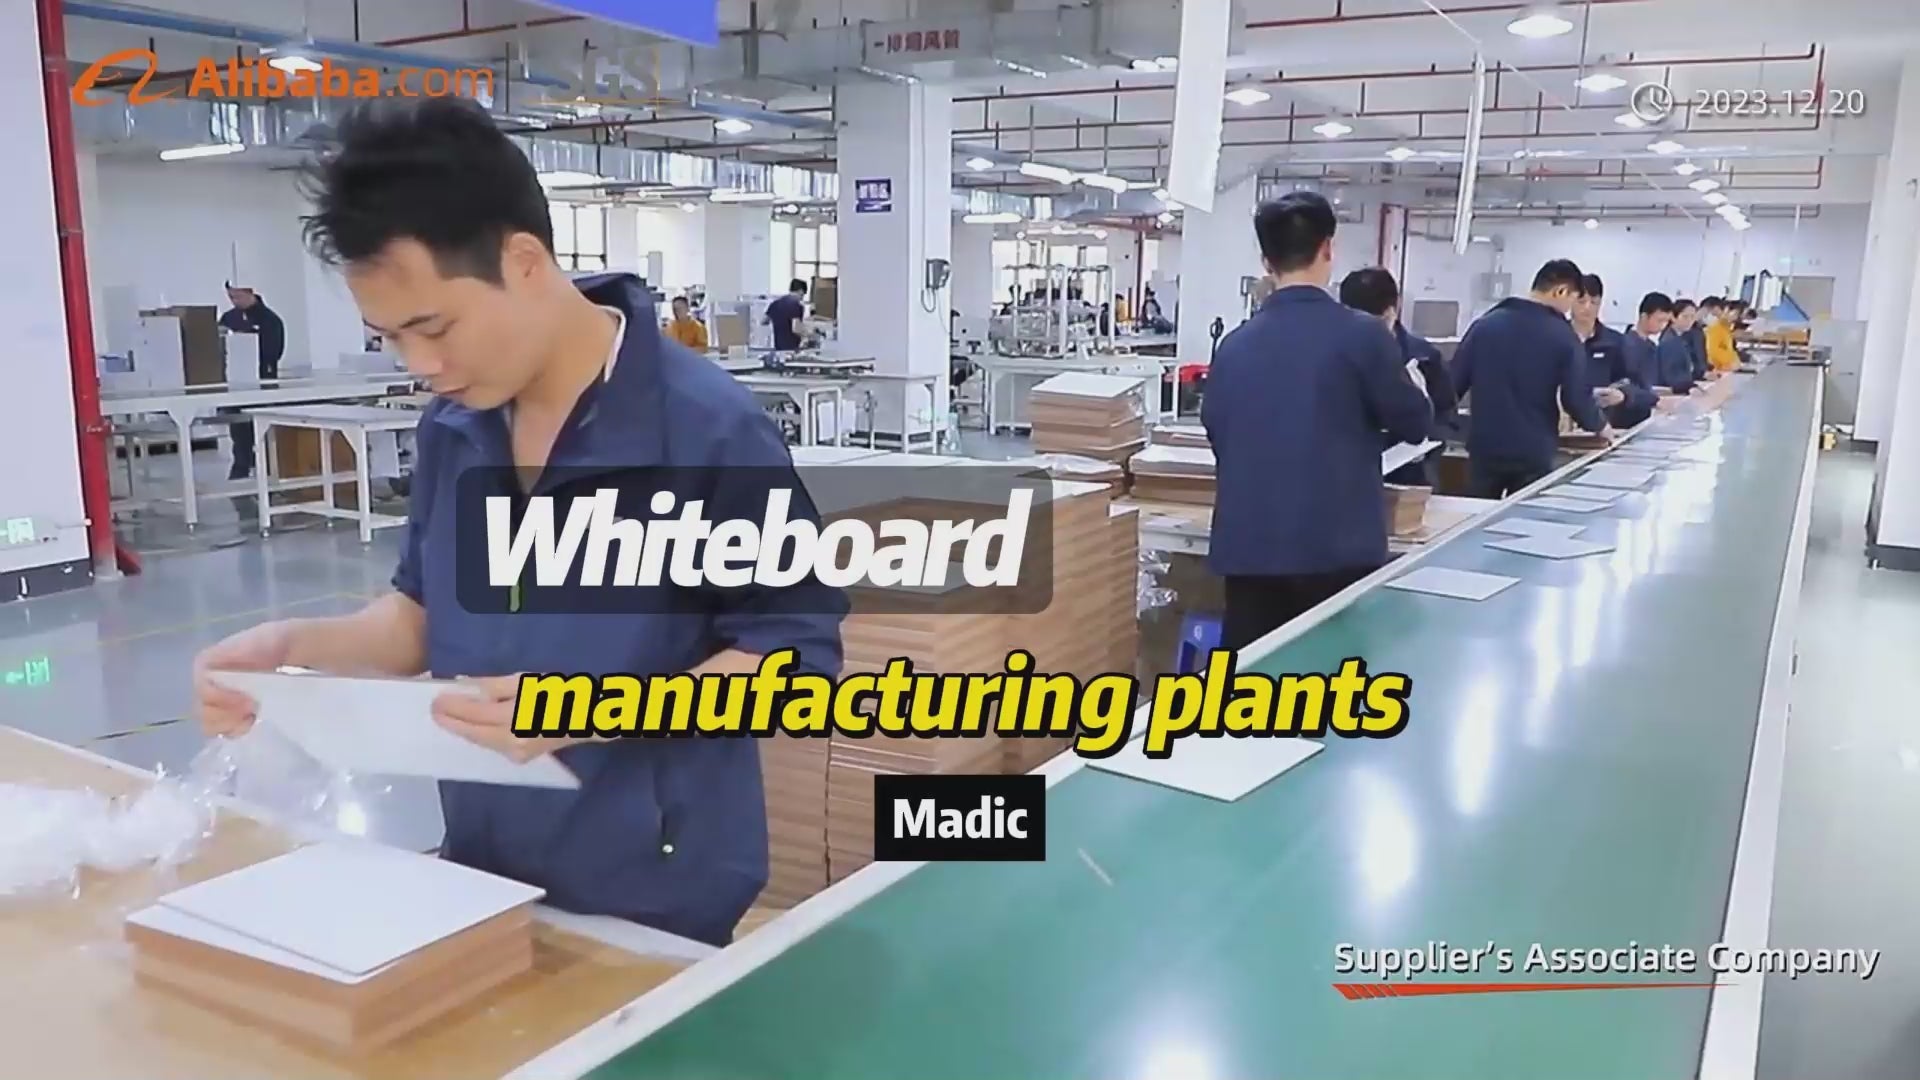 Load video: Madic whiteboard supplier